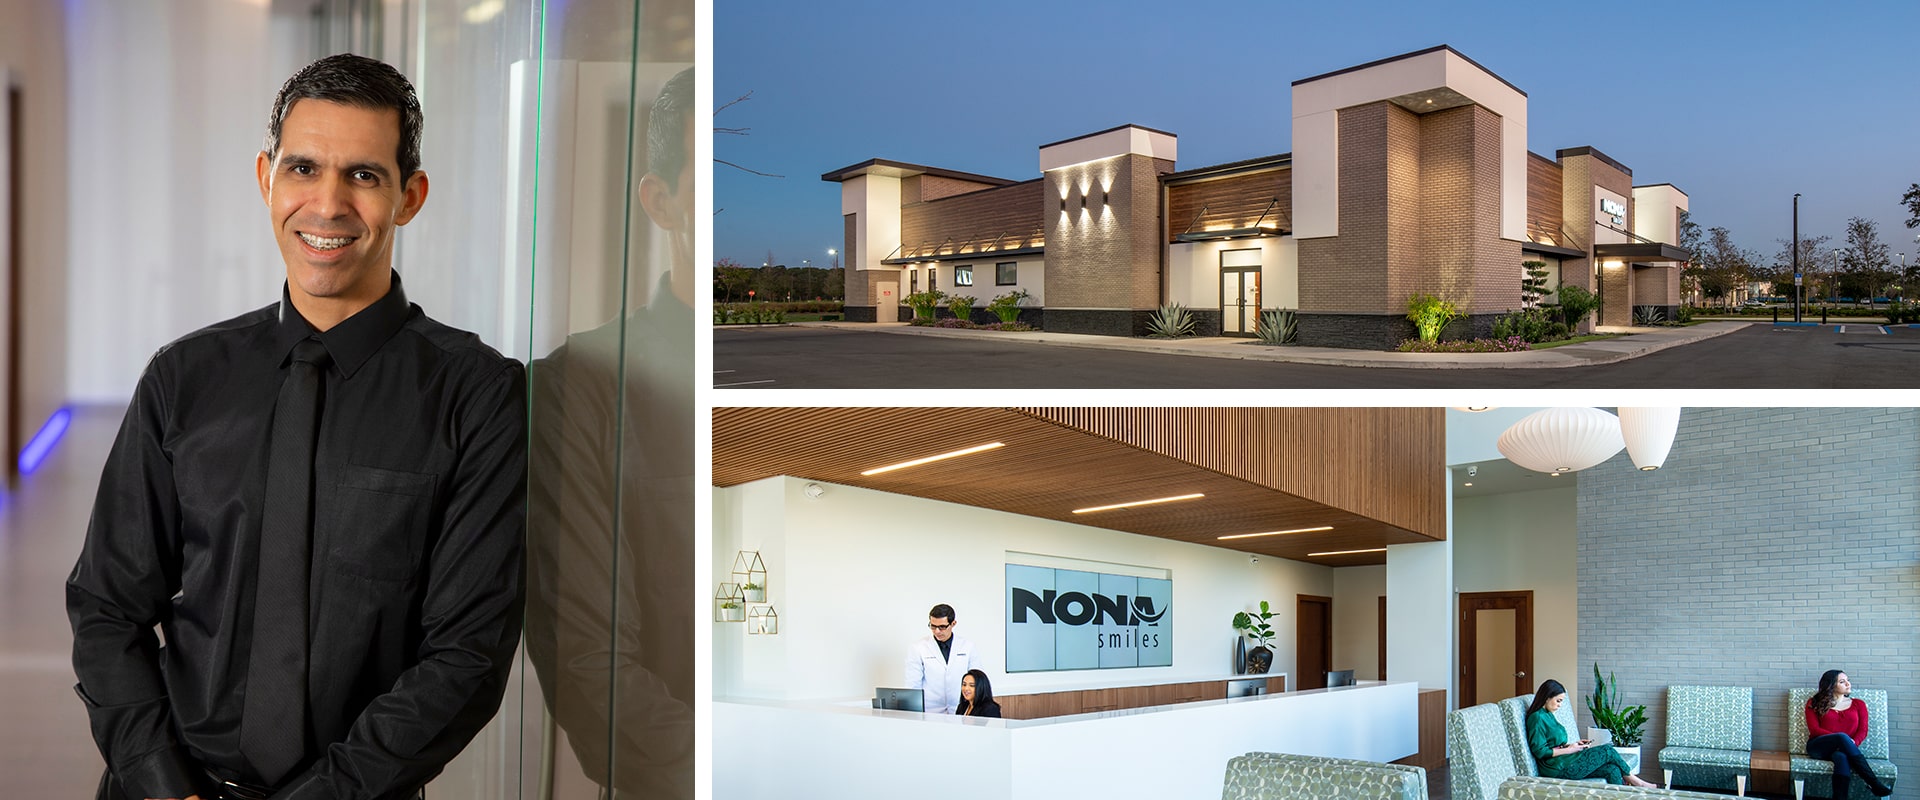 A collage of Dr. Carlos in action and the dental building of Nona Smiles